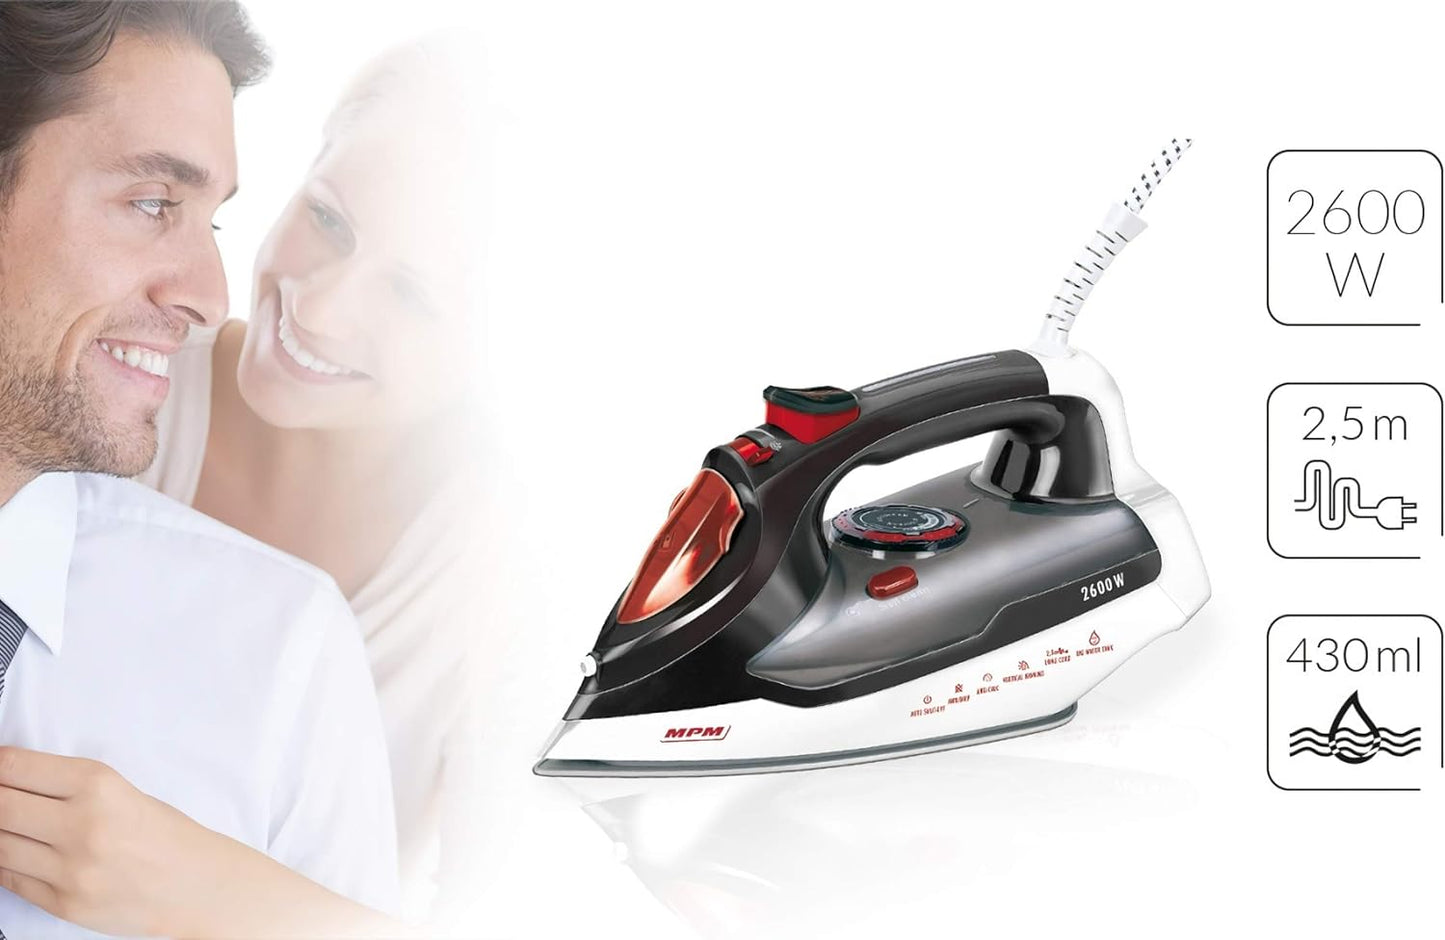 MPM MZE-17 Iron, Ceramic Soleplate, Steam Iron, Vertical Steam, Steam Tapping, Self-Cleaning, Drip Stop, 7 Functions, 430 ml Reservoir, Automatic Shut-Off, 2600 W